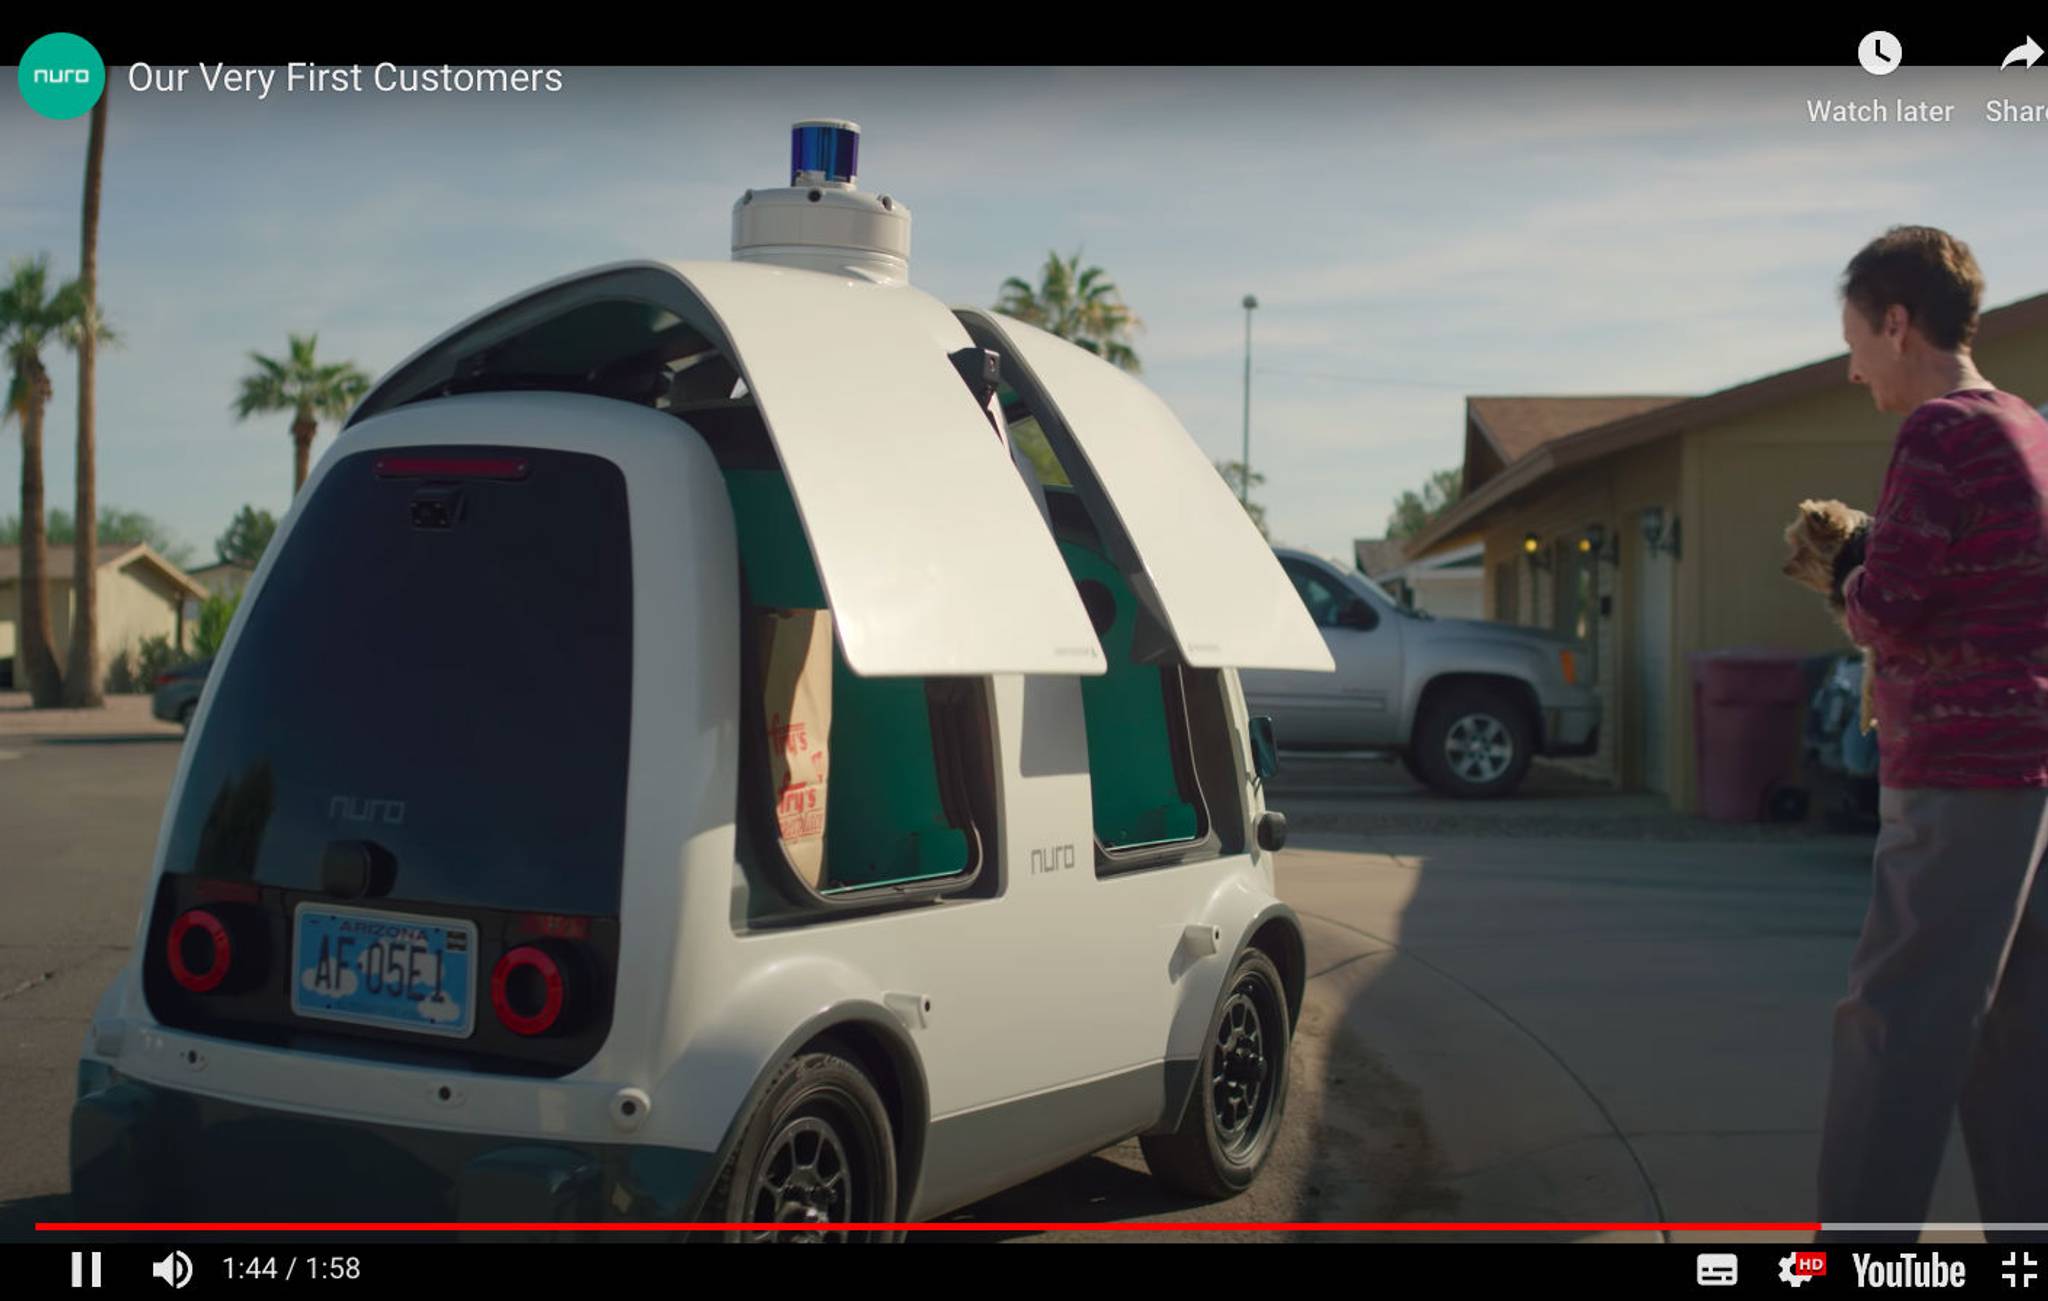 Nuro driverless EVs deliver groceries in busy cities